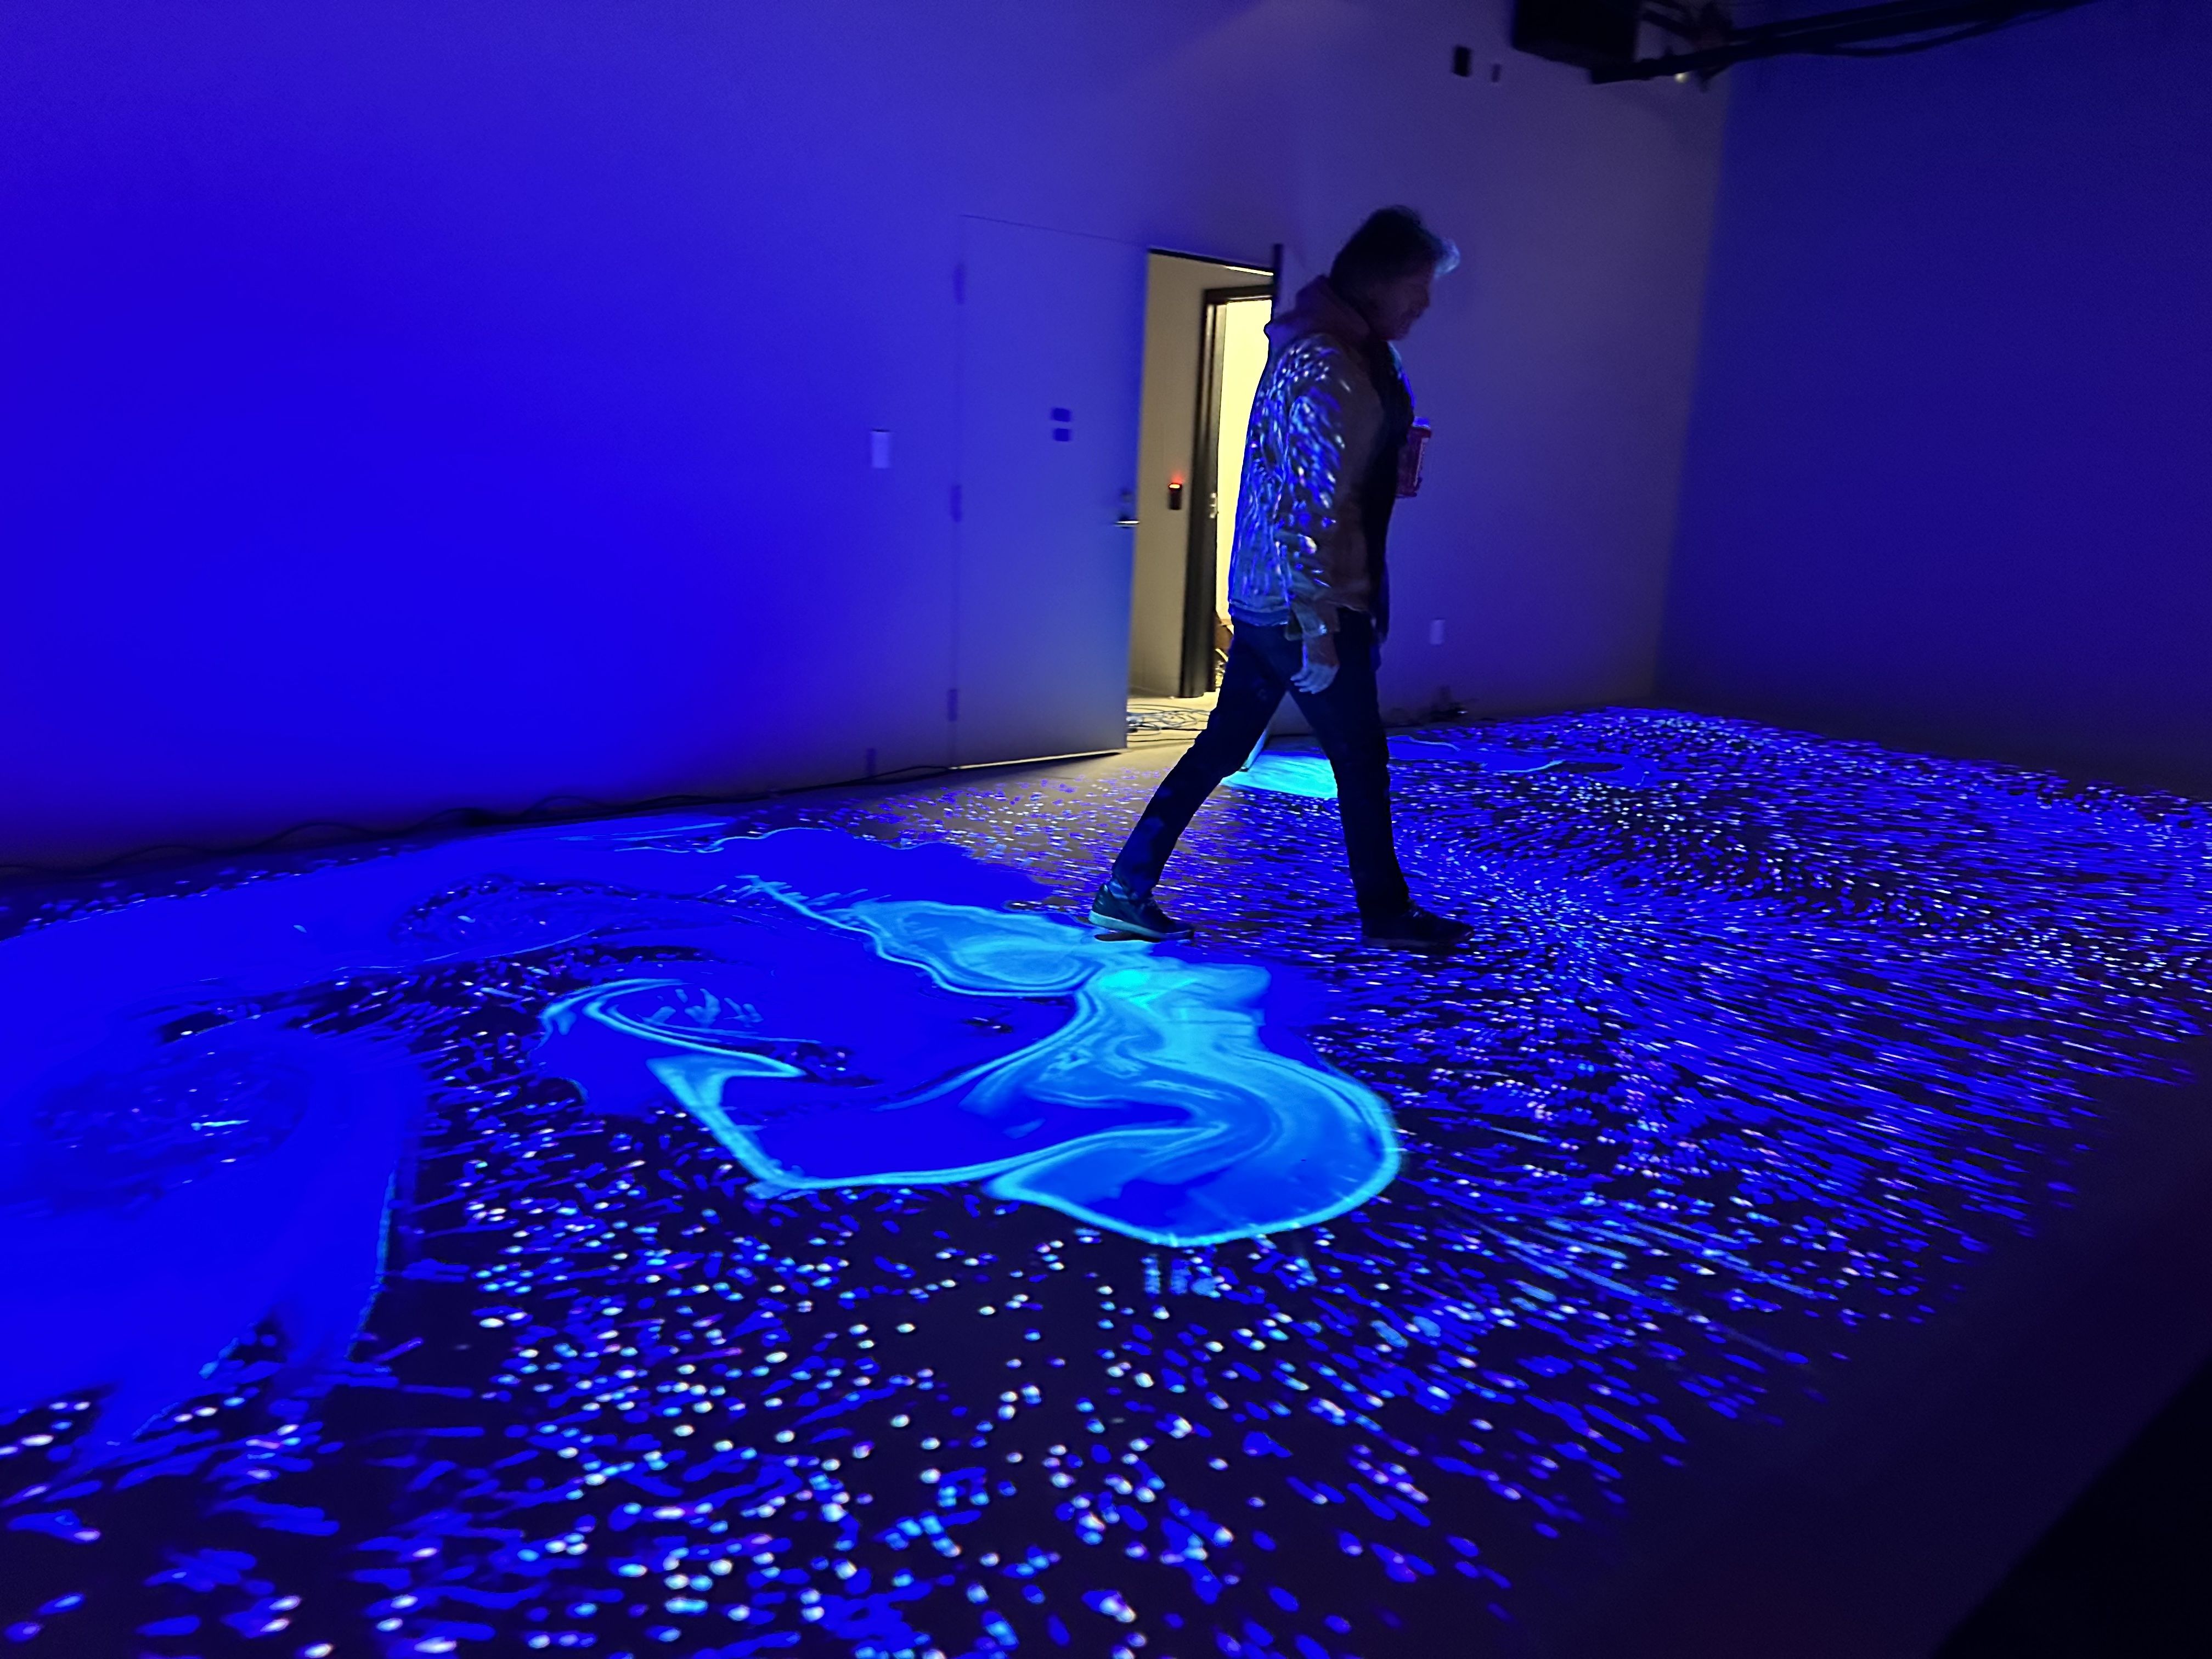 A man walks through a dark room with blue lights projected onto the floor that move whenever someone steps on them/the floor at WNDR Museum.